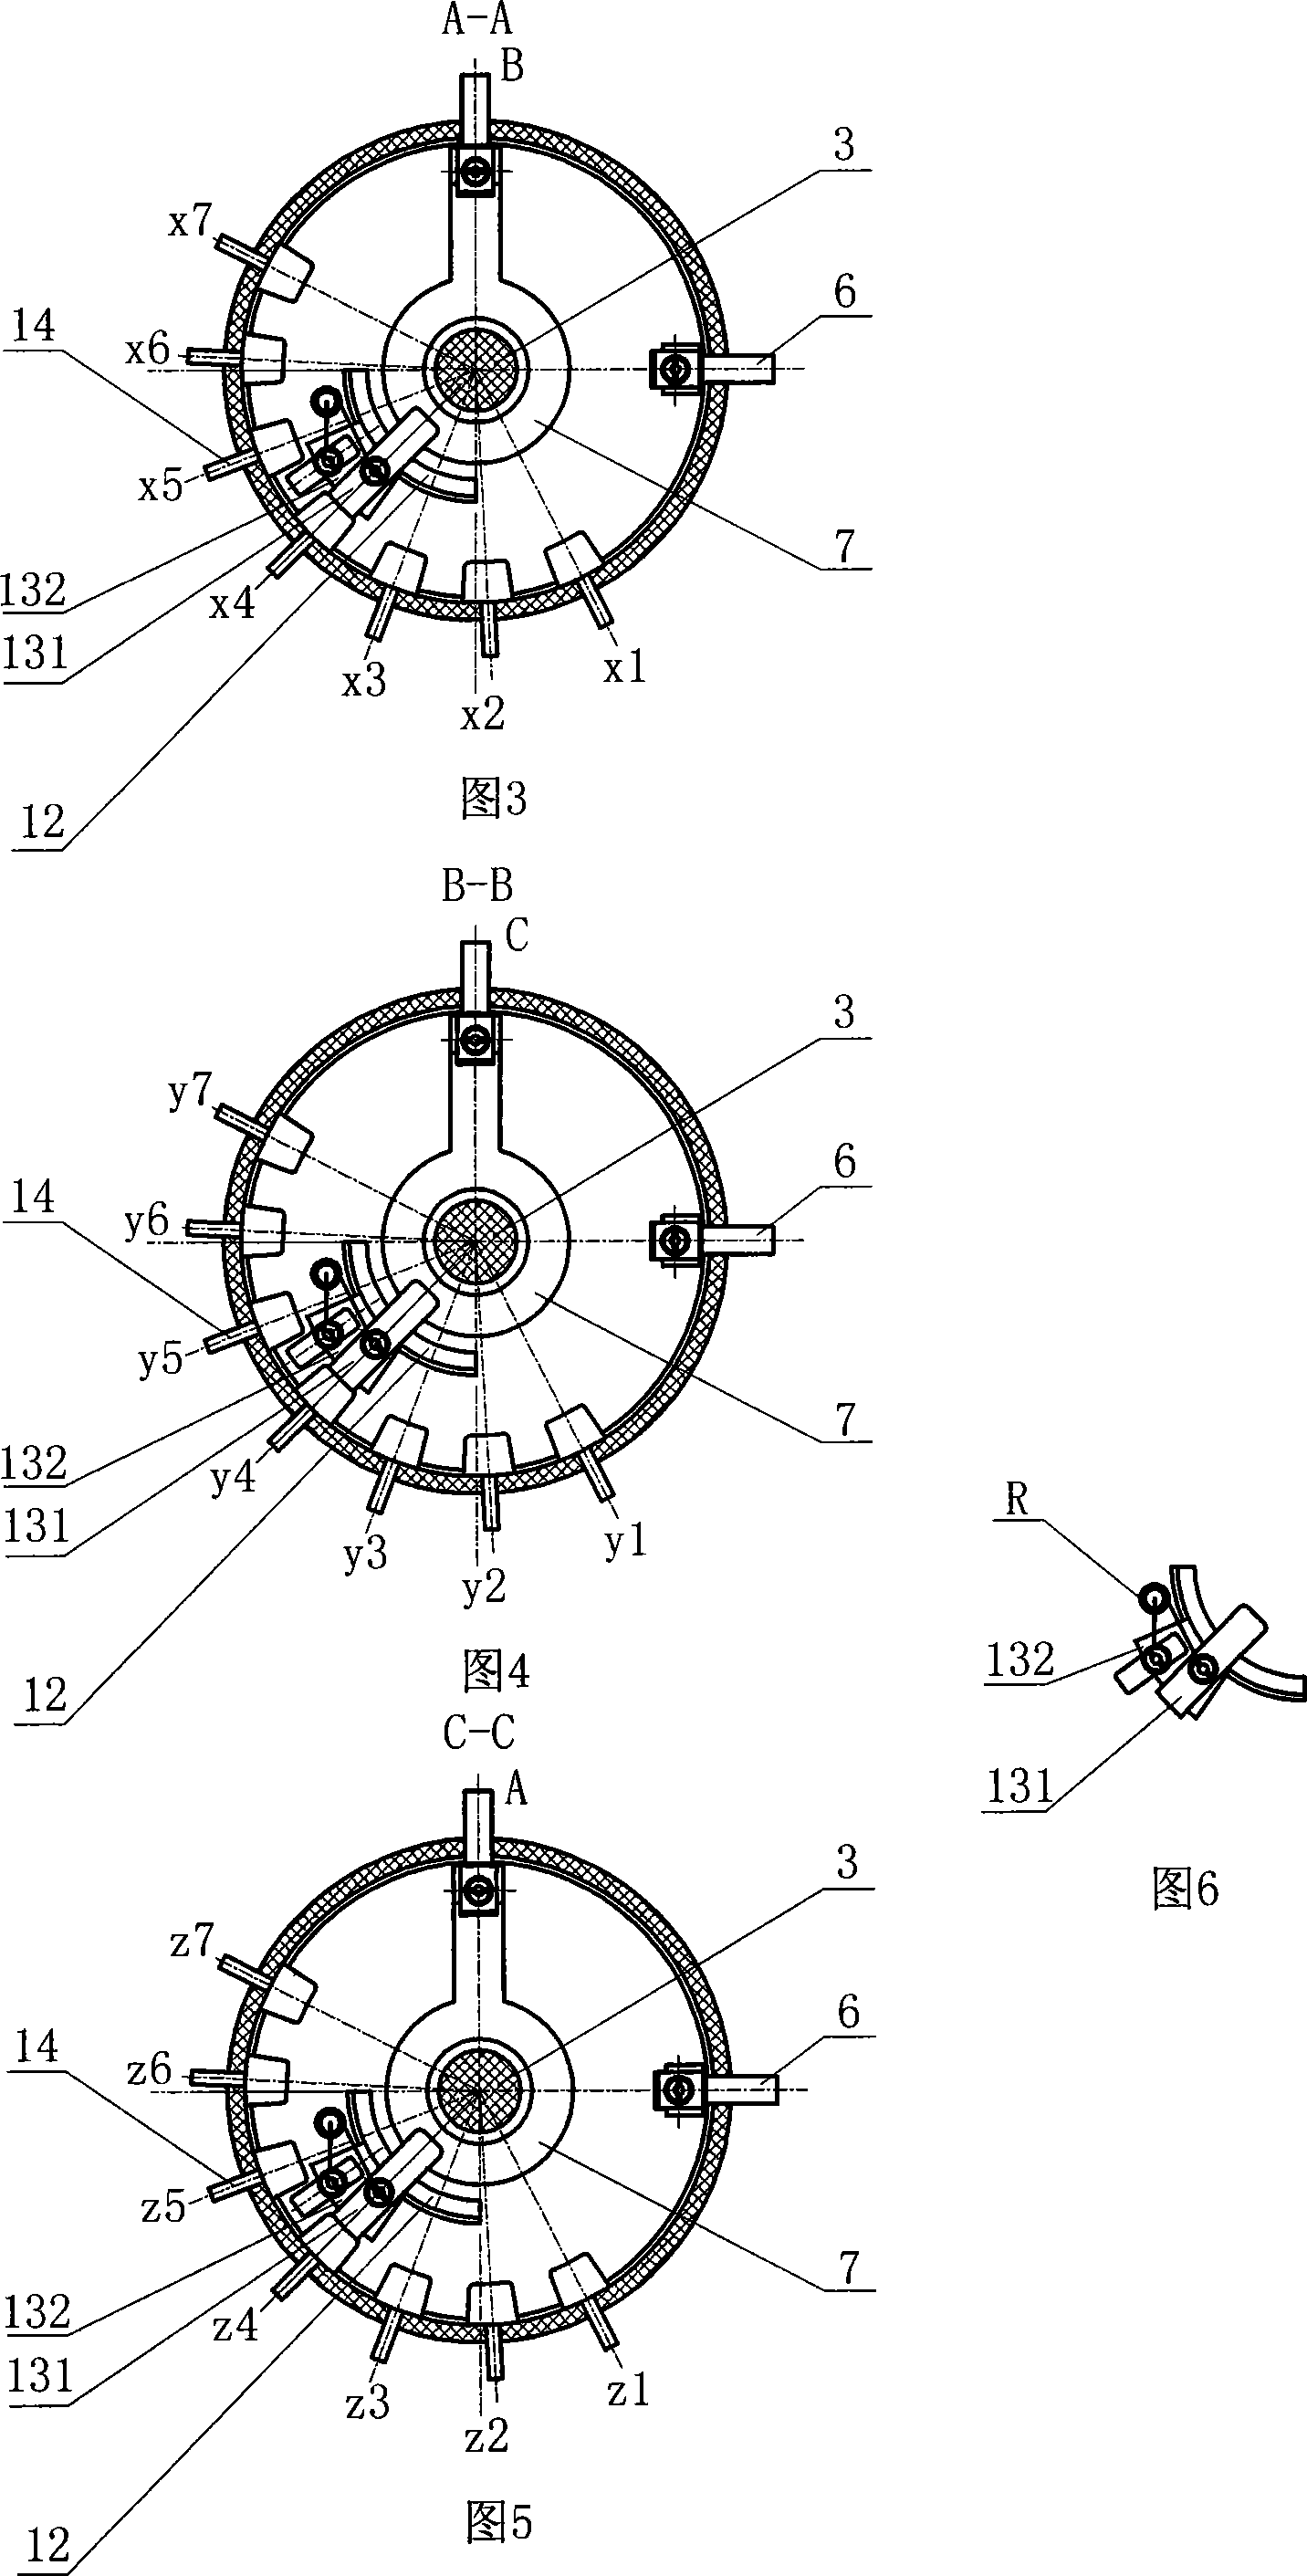 Load capacity and pressure regulating switch for transformer